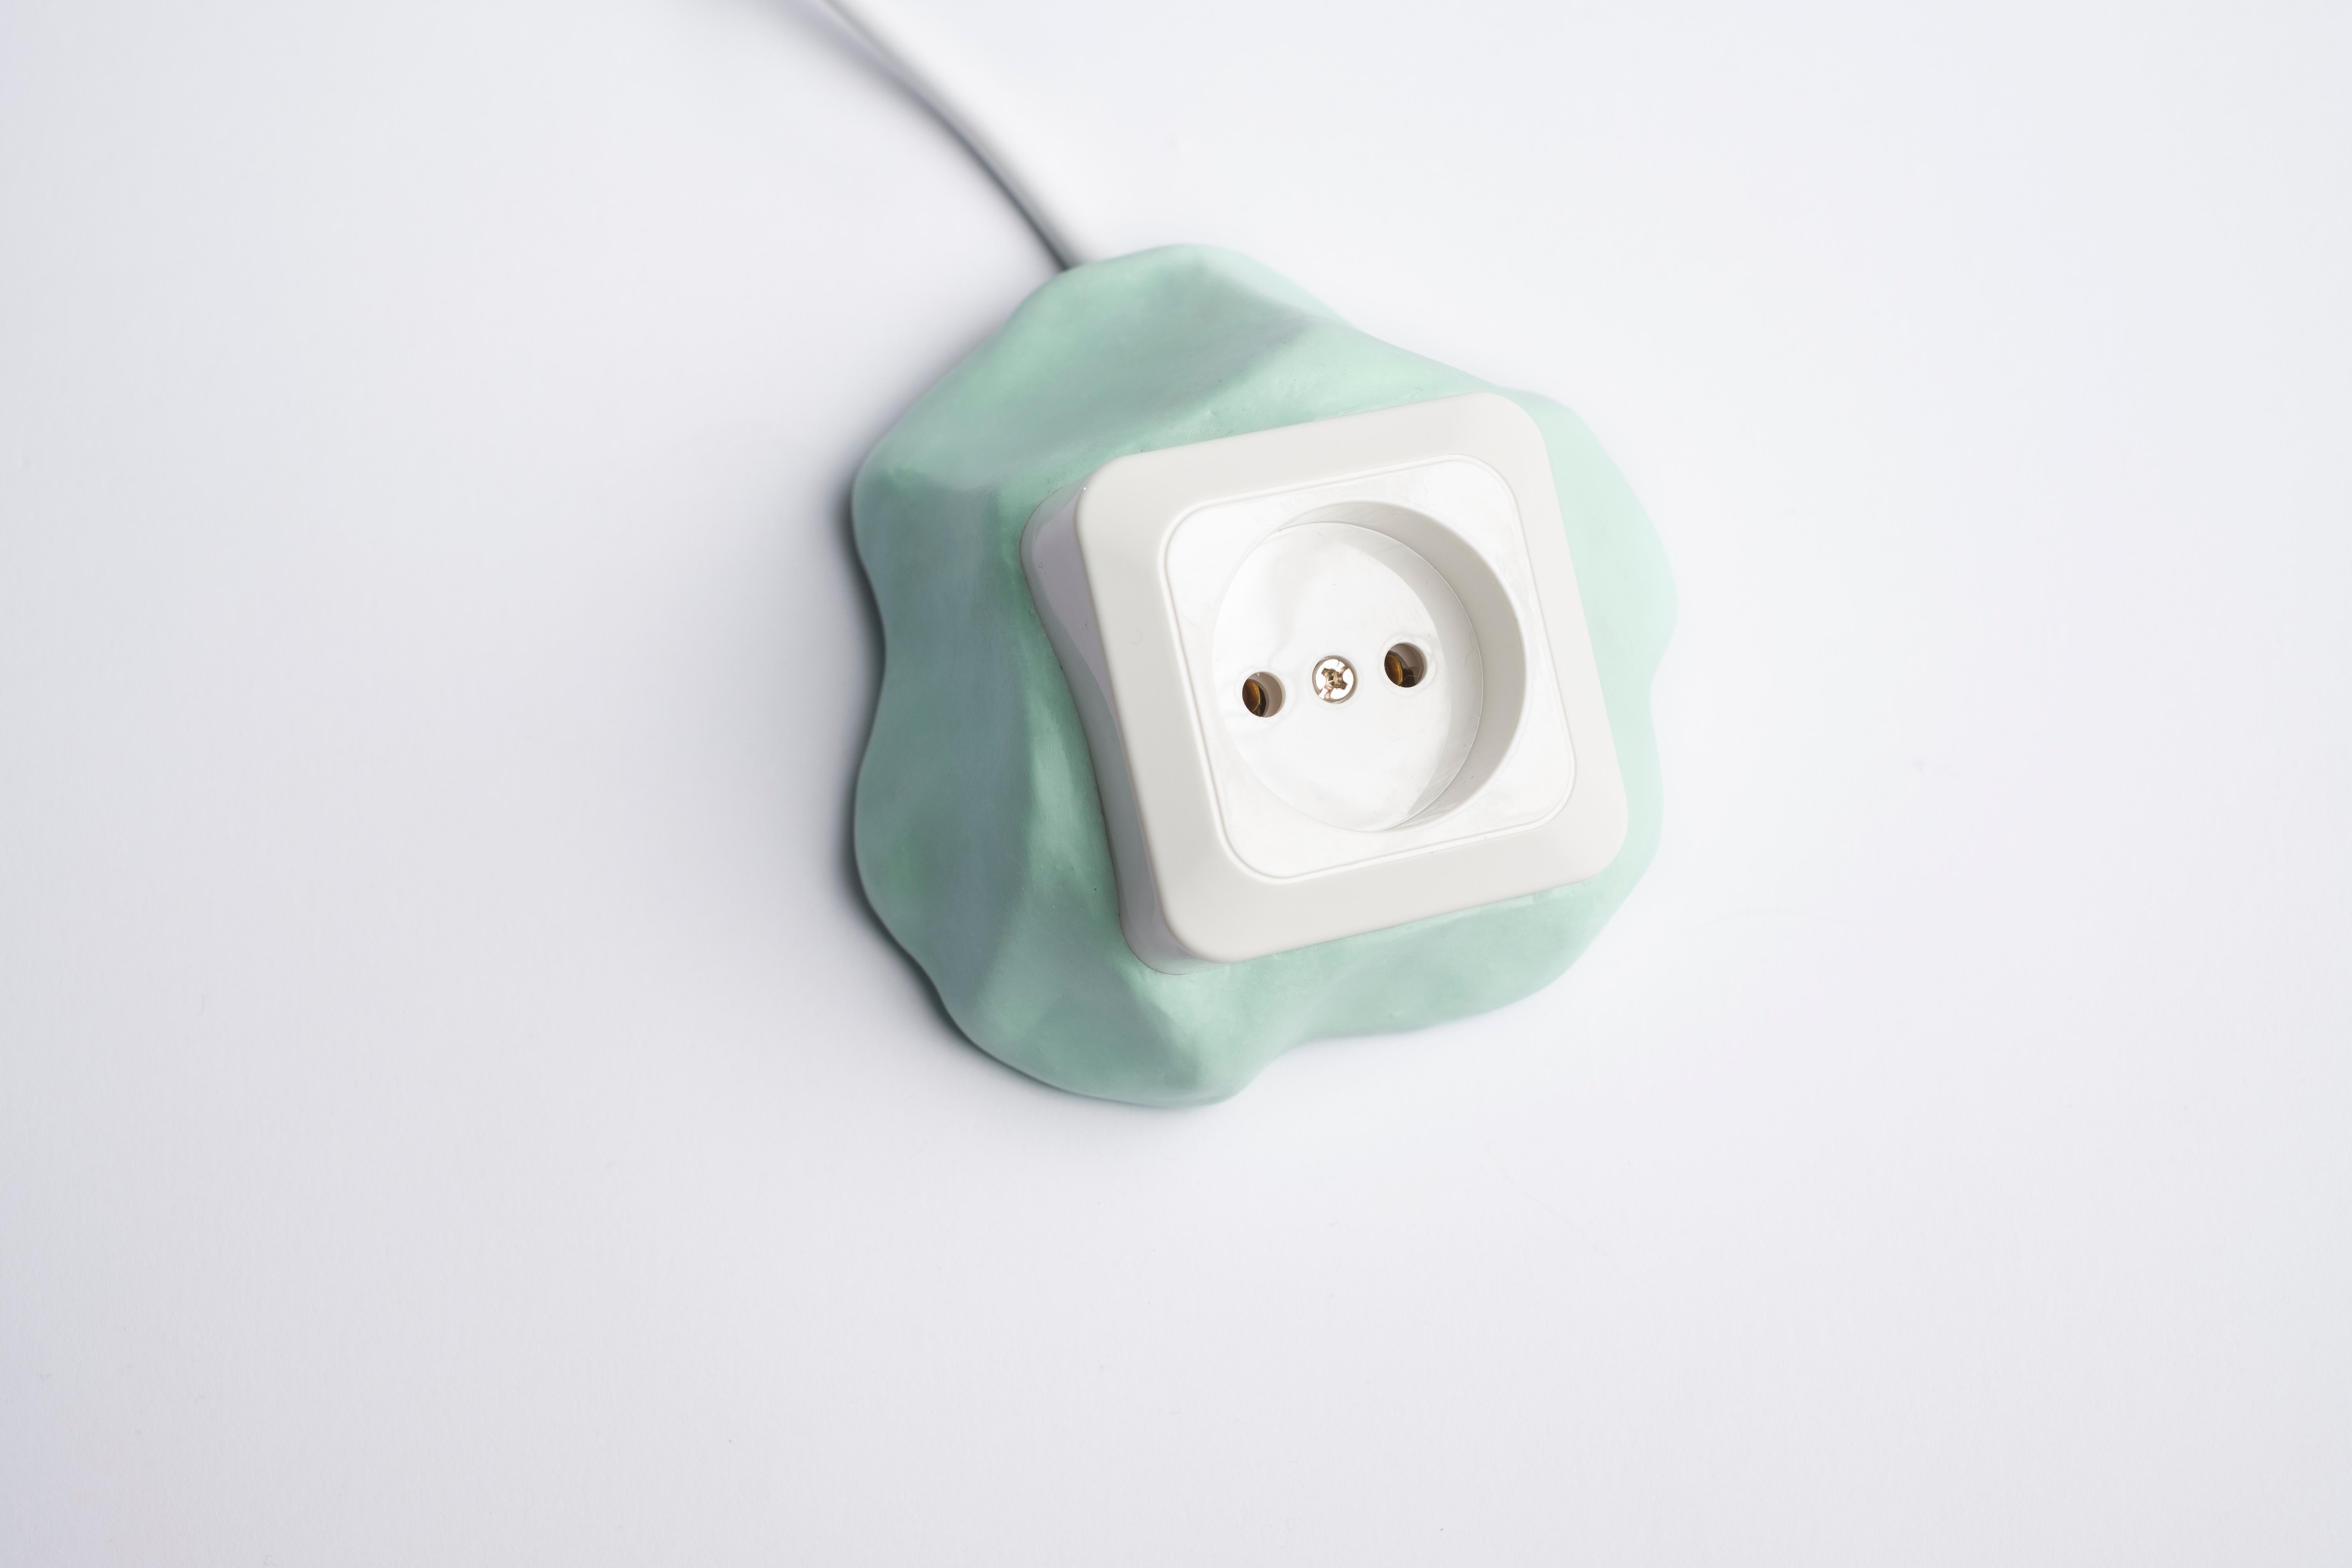 Single socket object 16.5. Mint SAKER by Studio Gert Wessels, mint. Hand crafted in an organic shape and made in his studio in the Netherlands. 

In his daily practice he investigates the relationship between form and function. The result is a